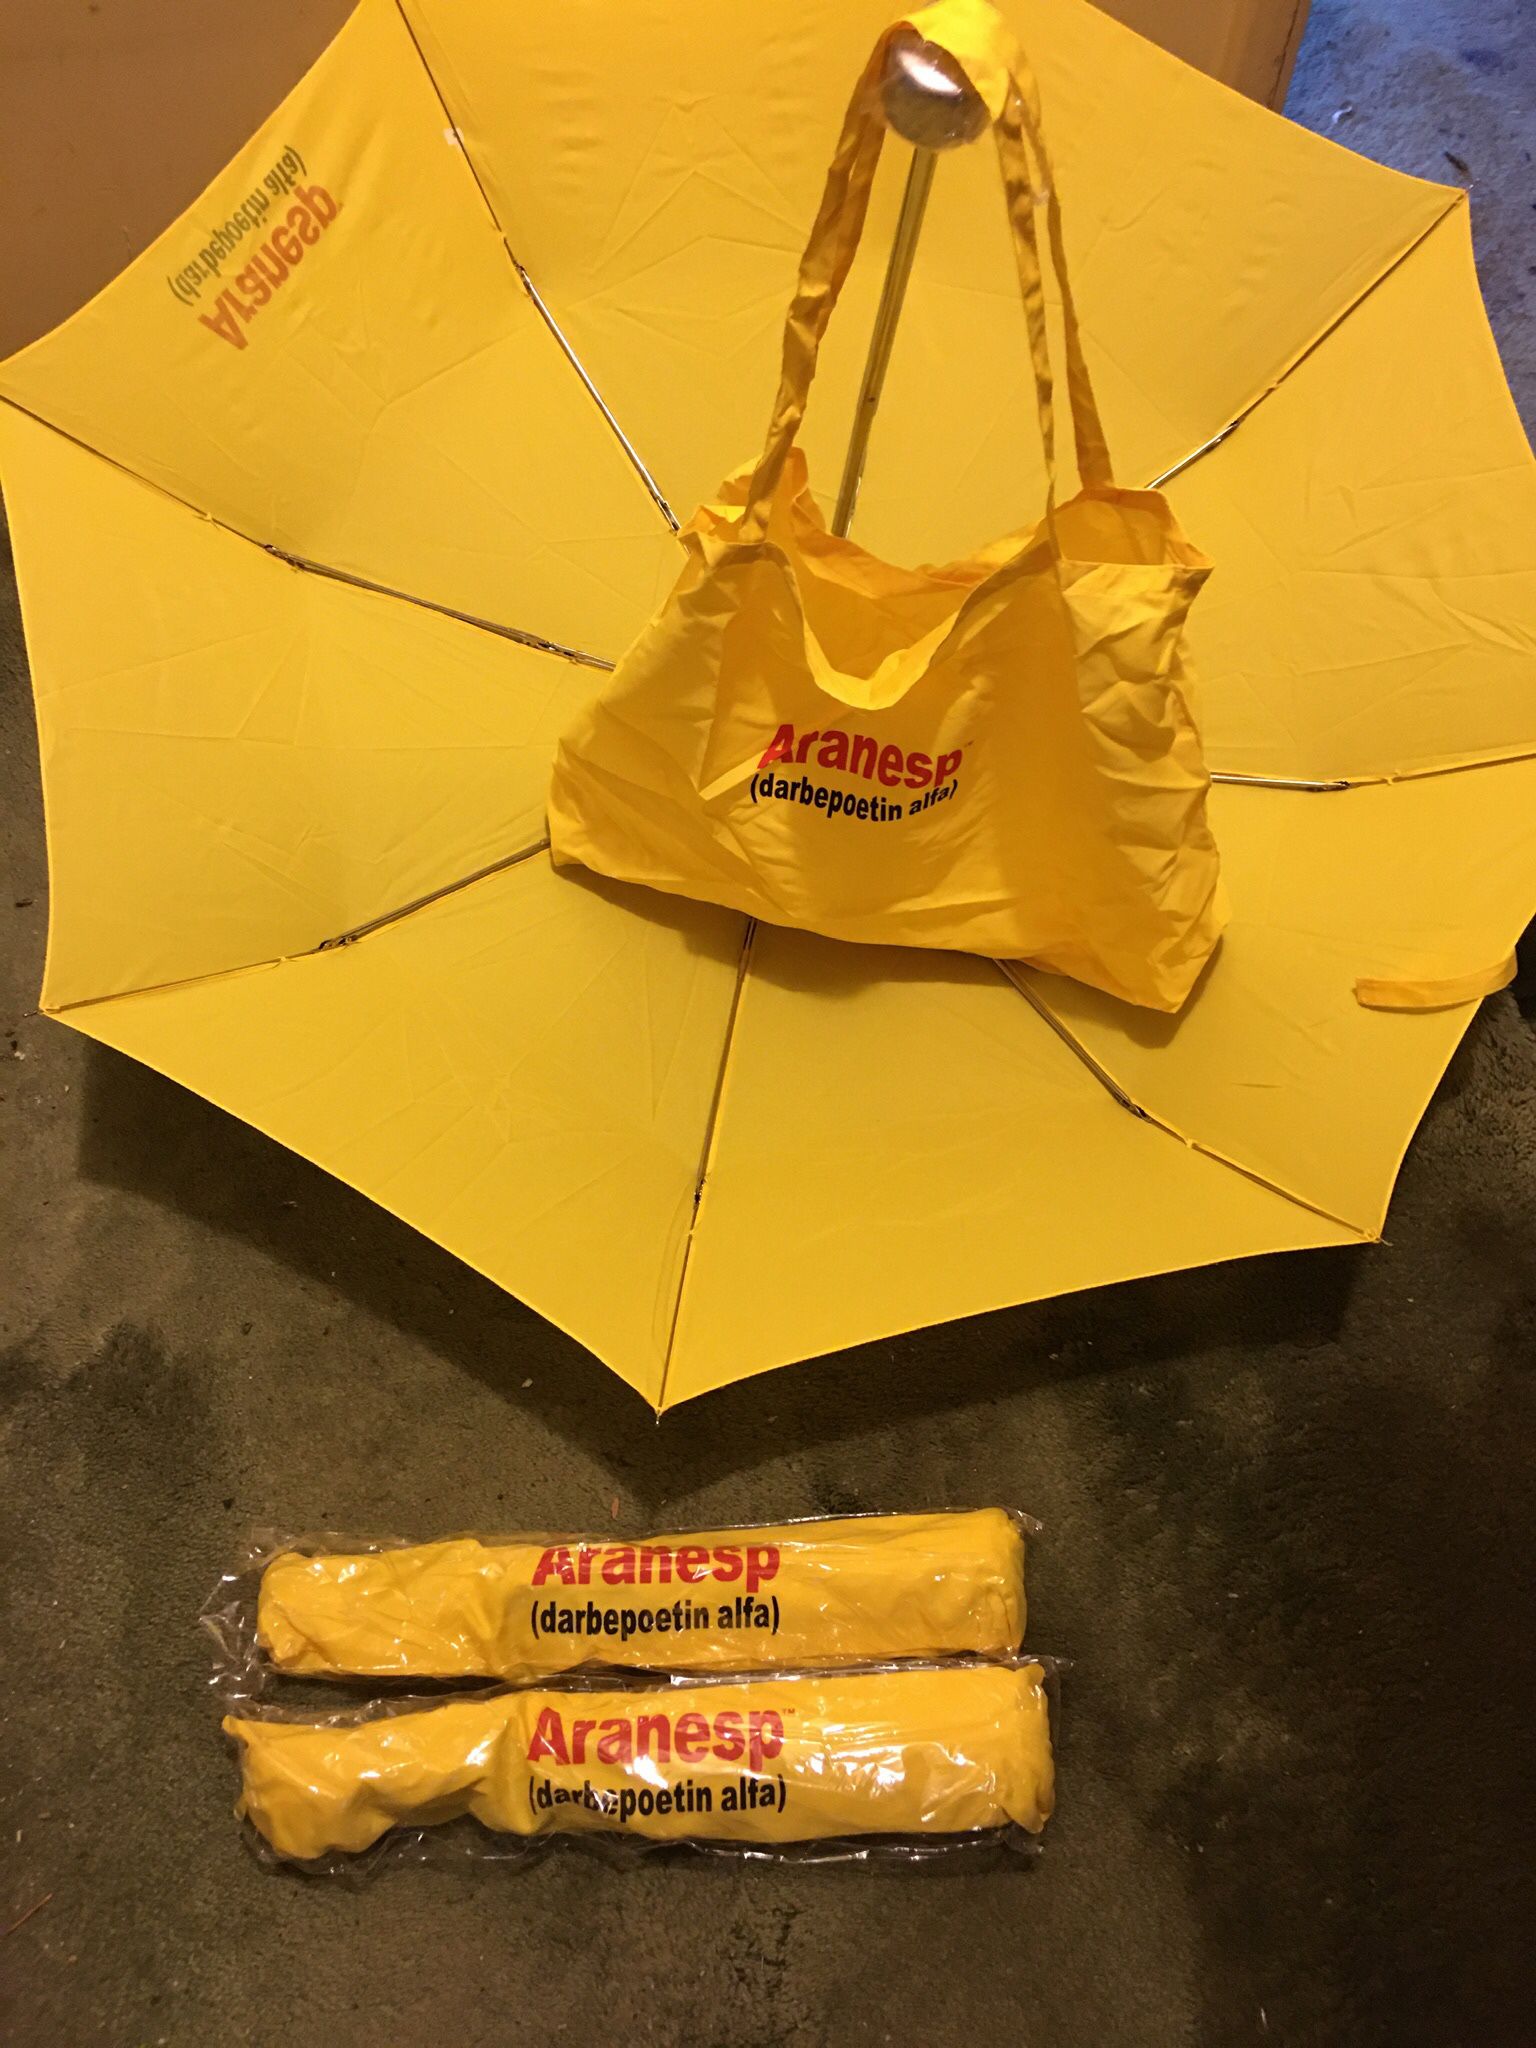 BRAND NEW 2-UMBRELLA WITH CARRIER BAG $20.00